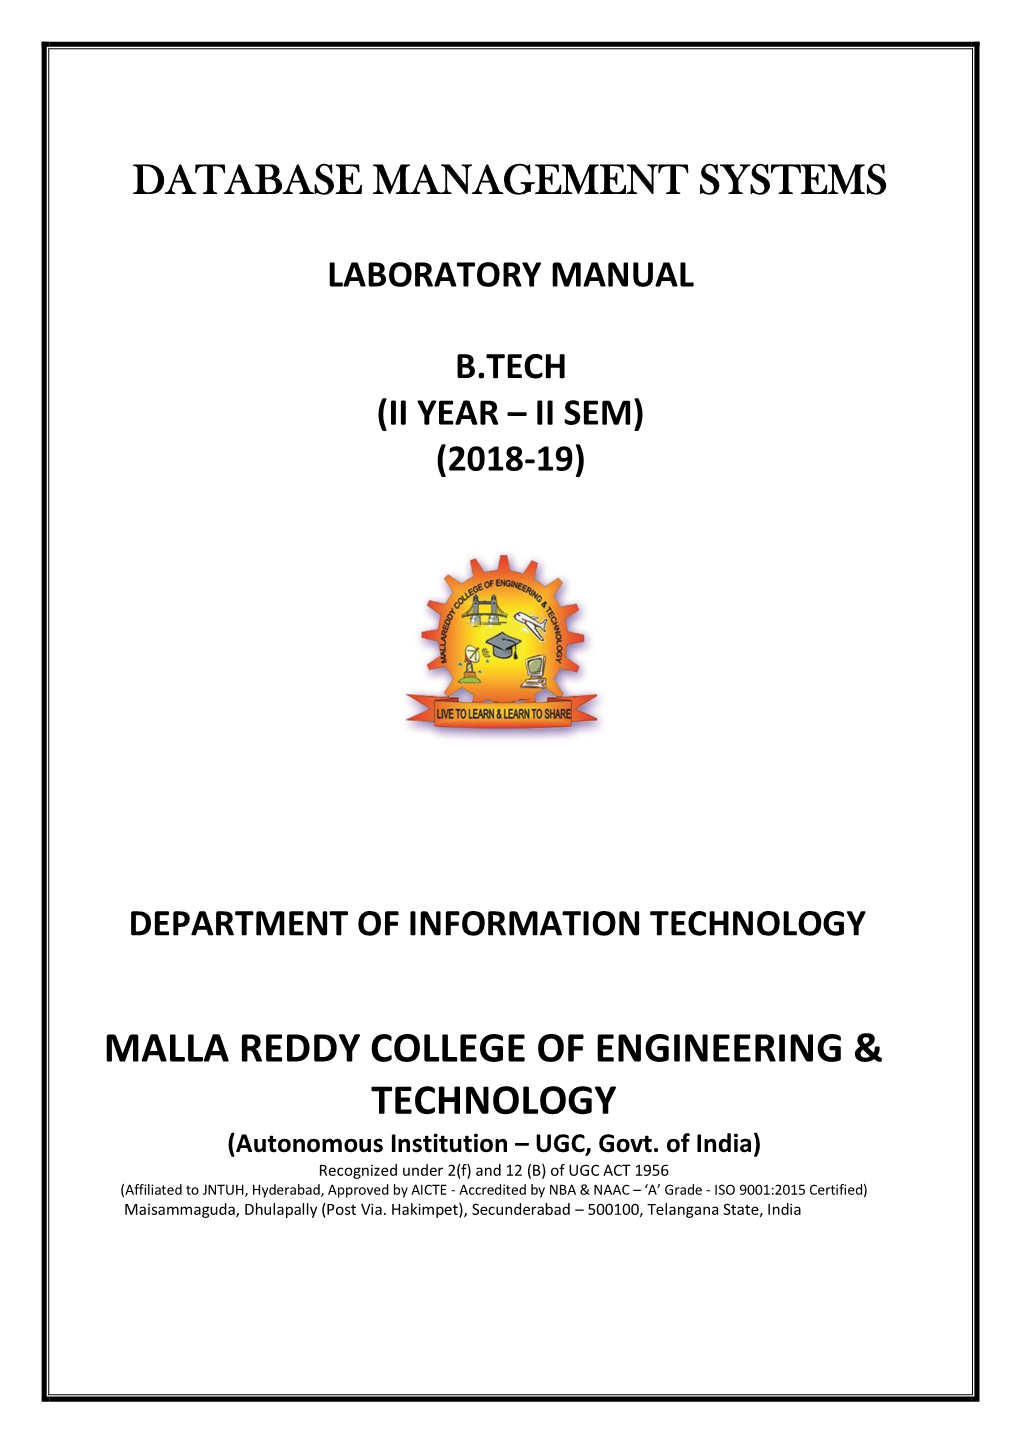 Database Management Systems Malla Reddy College of Engineering & Technology